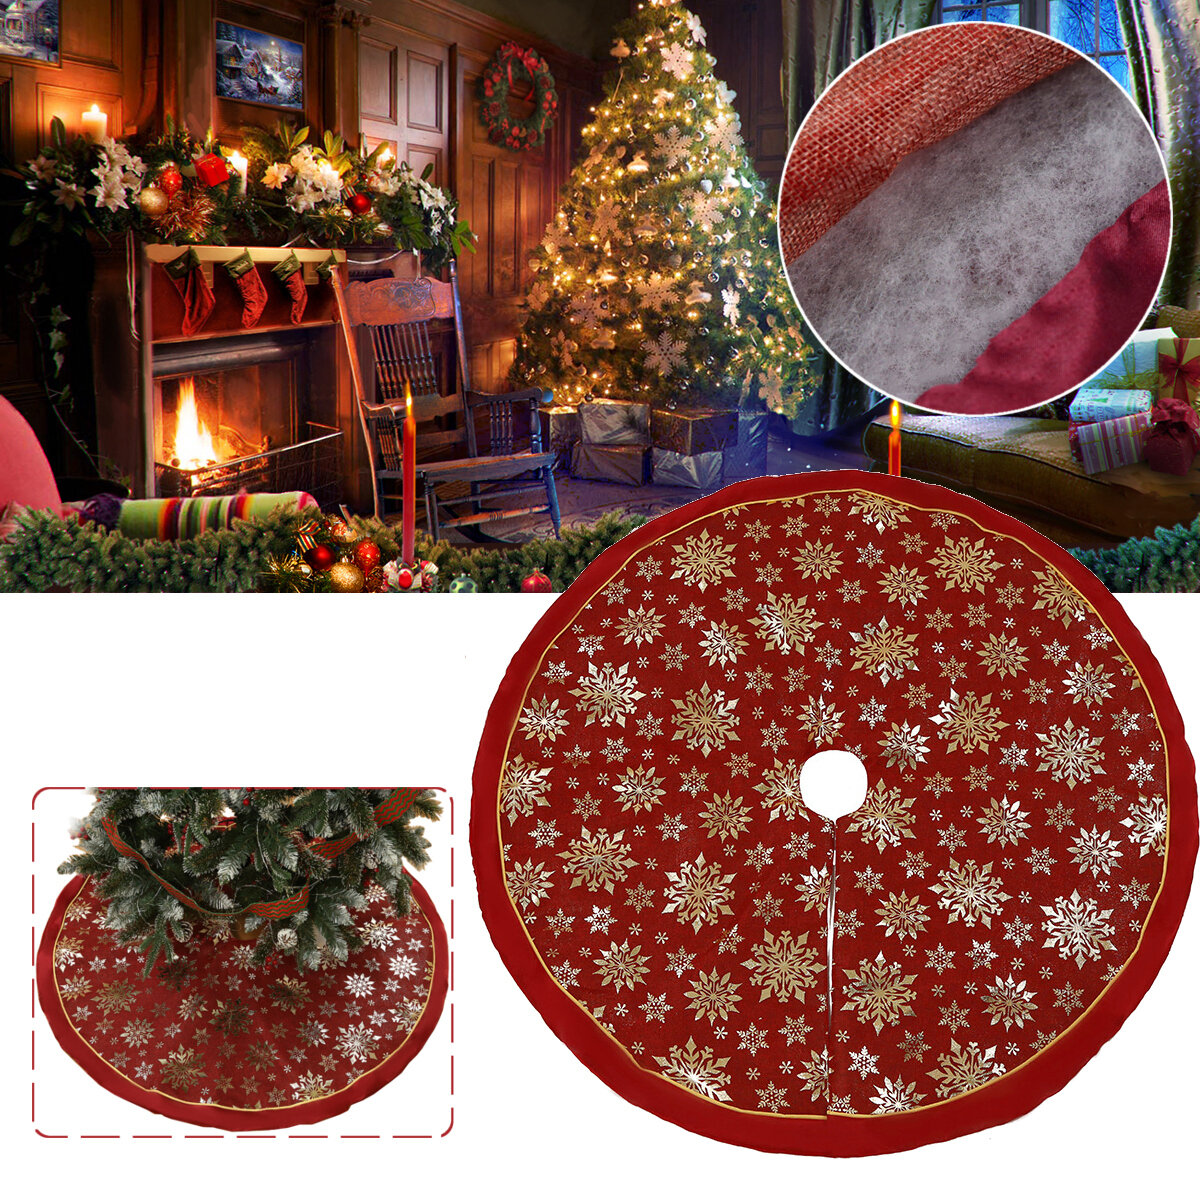 

120cm Stitched Santa Christmas Snowflake Skir Tree Skirt for Home New Year 2020 Christmas Fancy Decoration